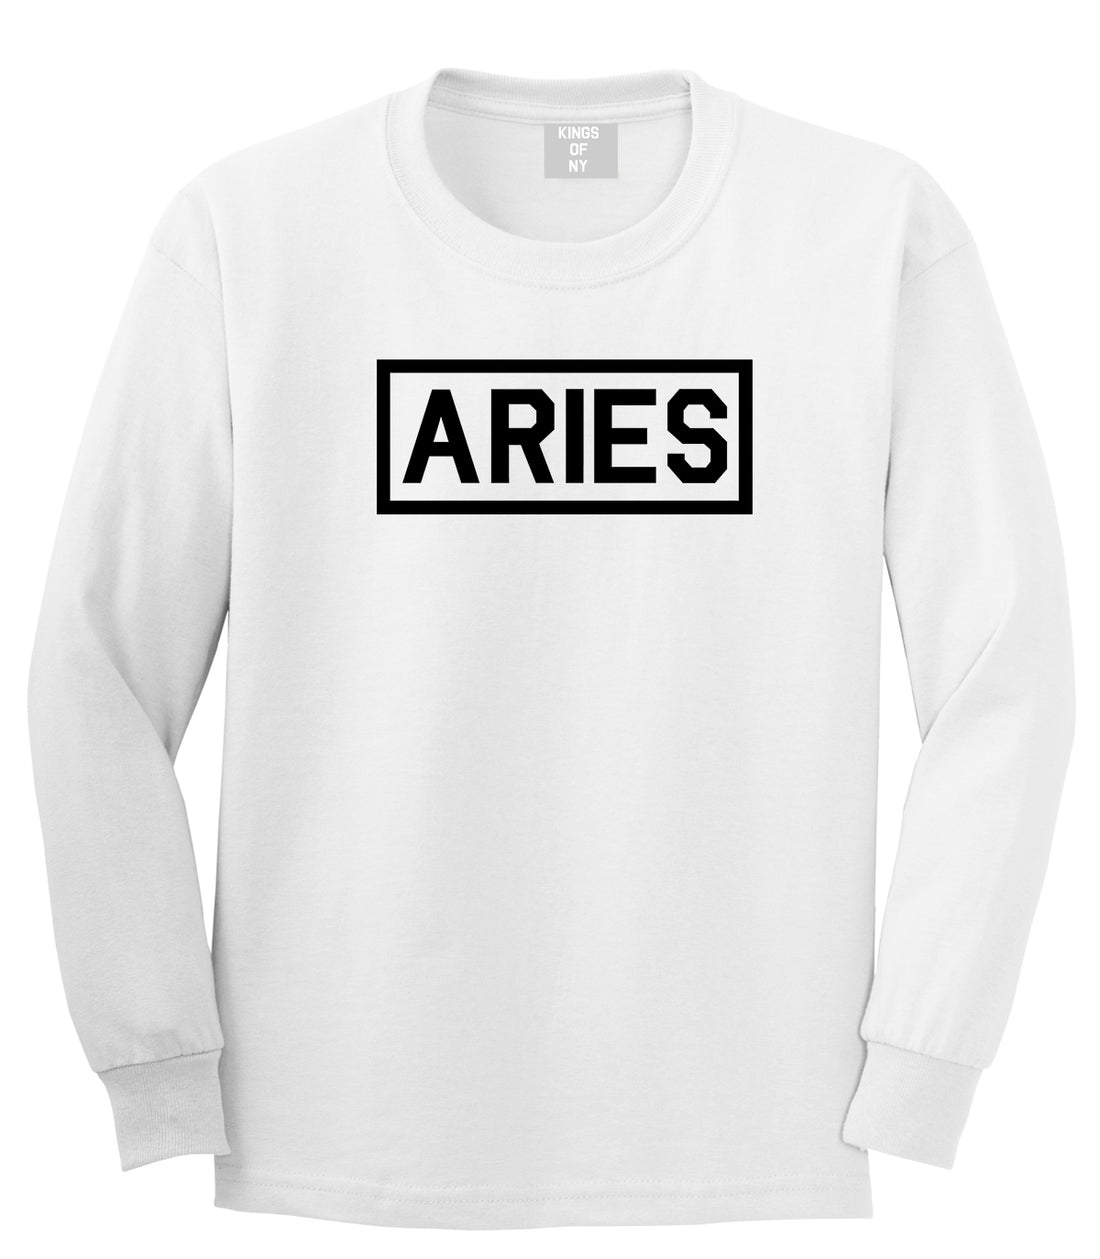 Aries Horoscope Sign Mens White Long Sleeve T-Shirt by KINGS OF NY